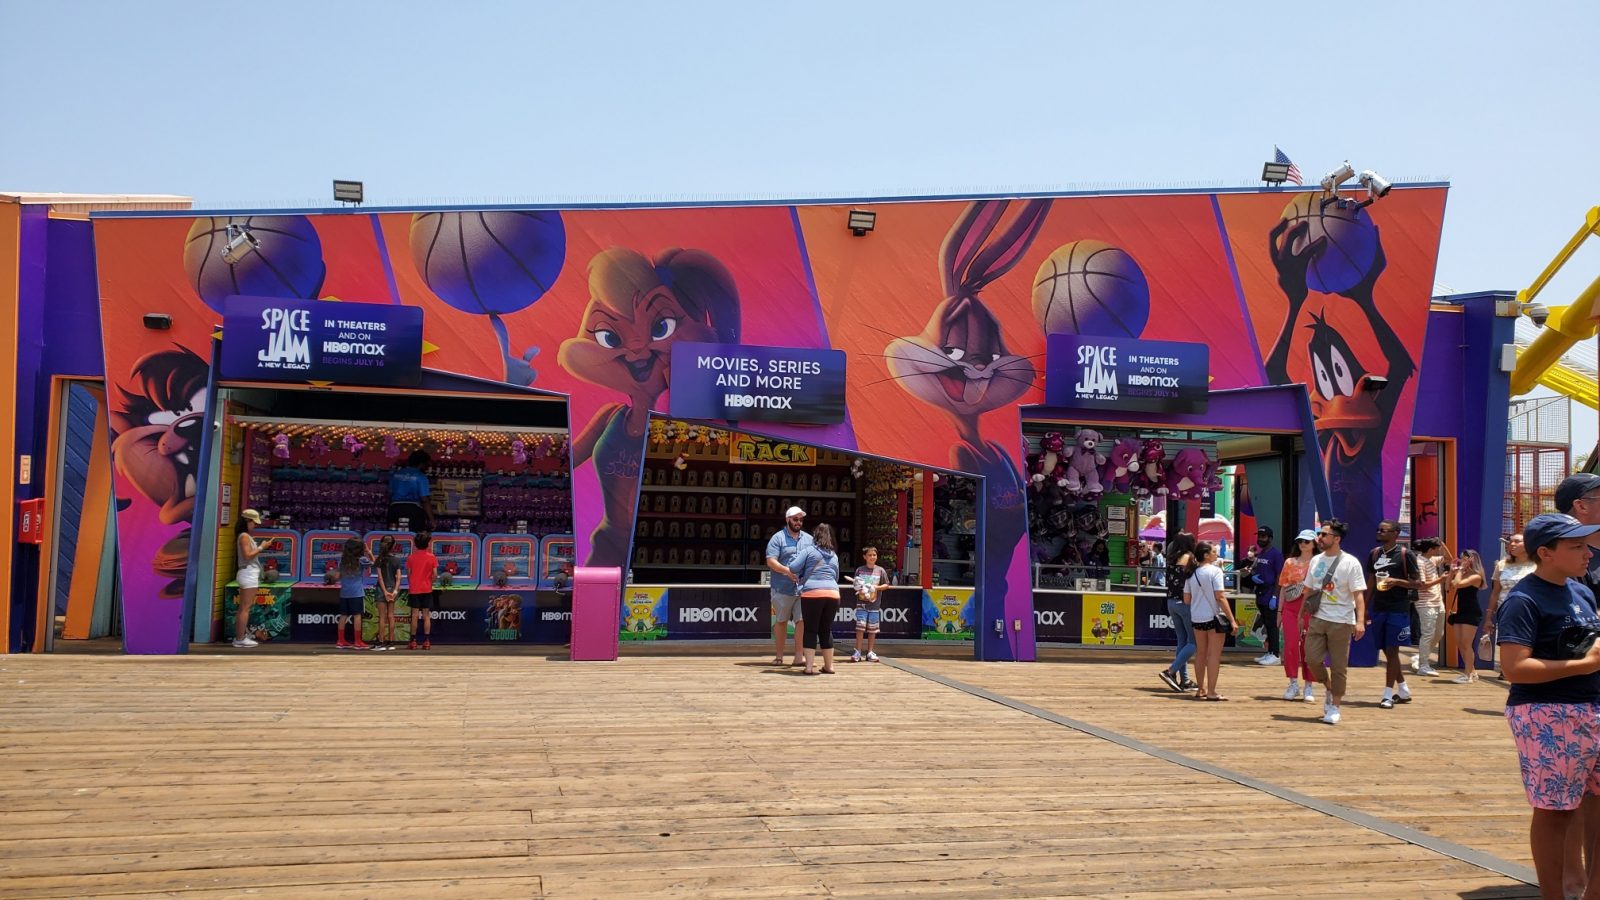 HBO max at pacific park on the santa monica pier looney tunes background decorations